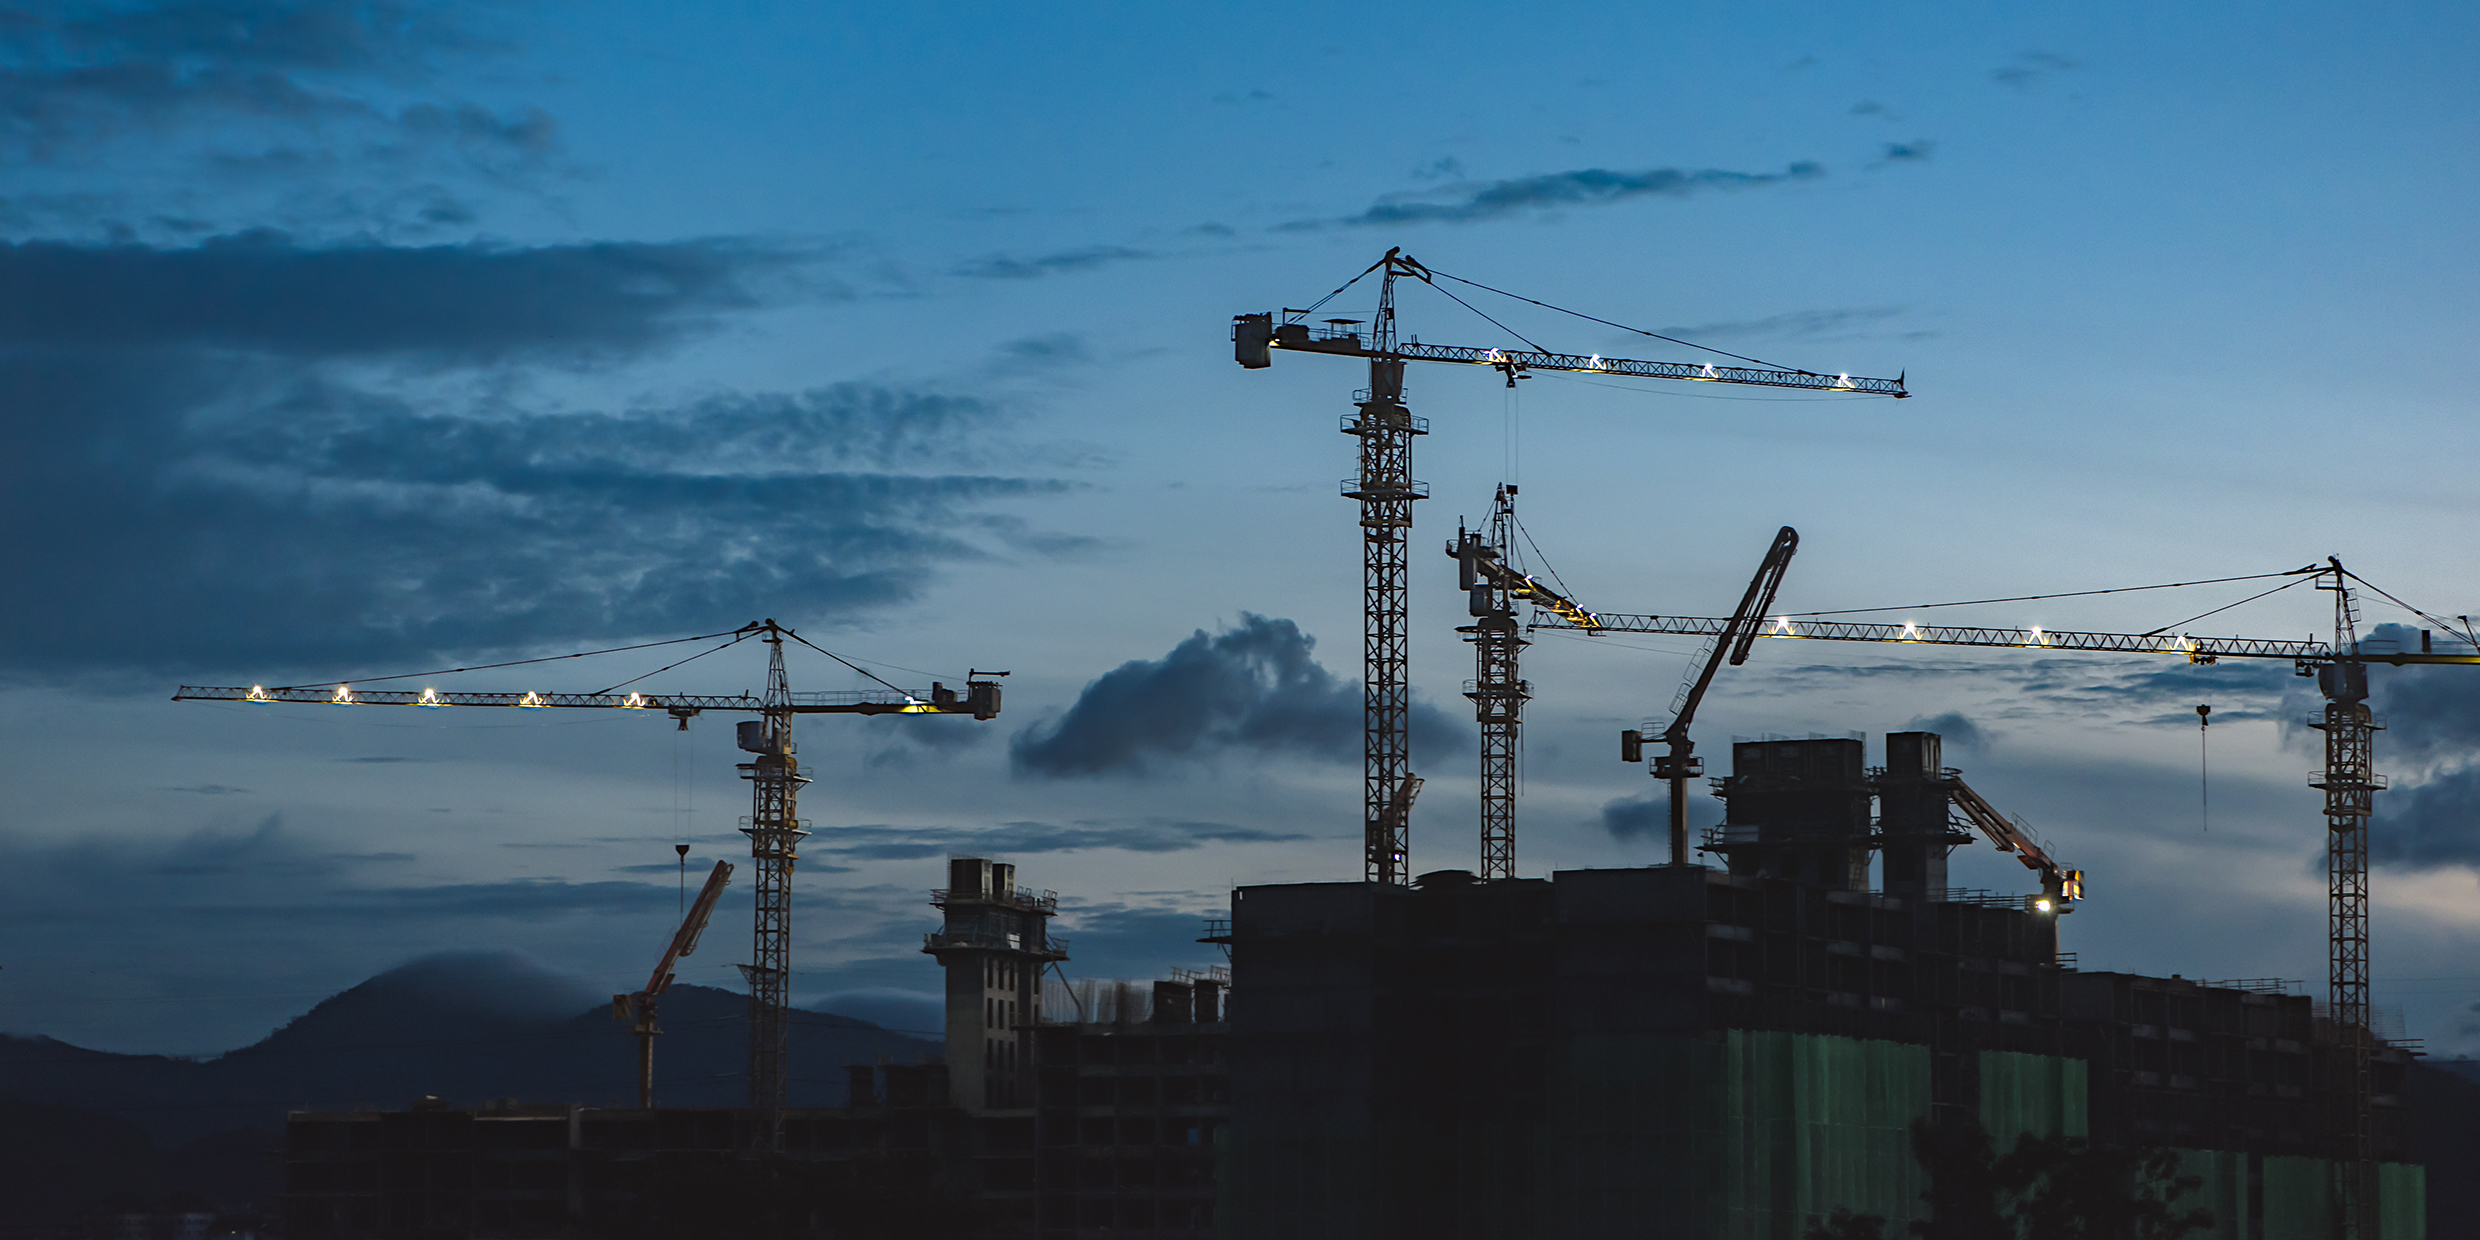 Image of construction cranes over a cityscape